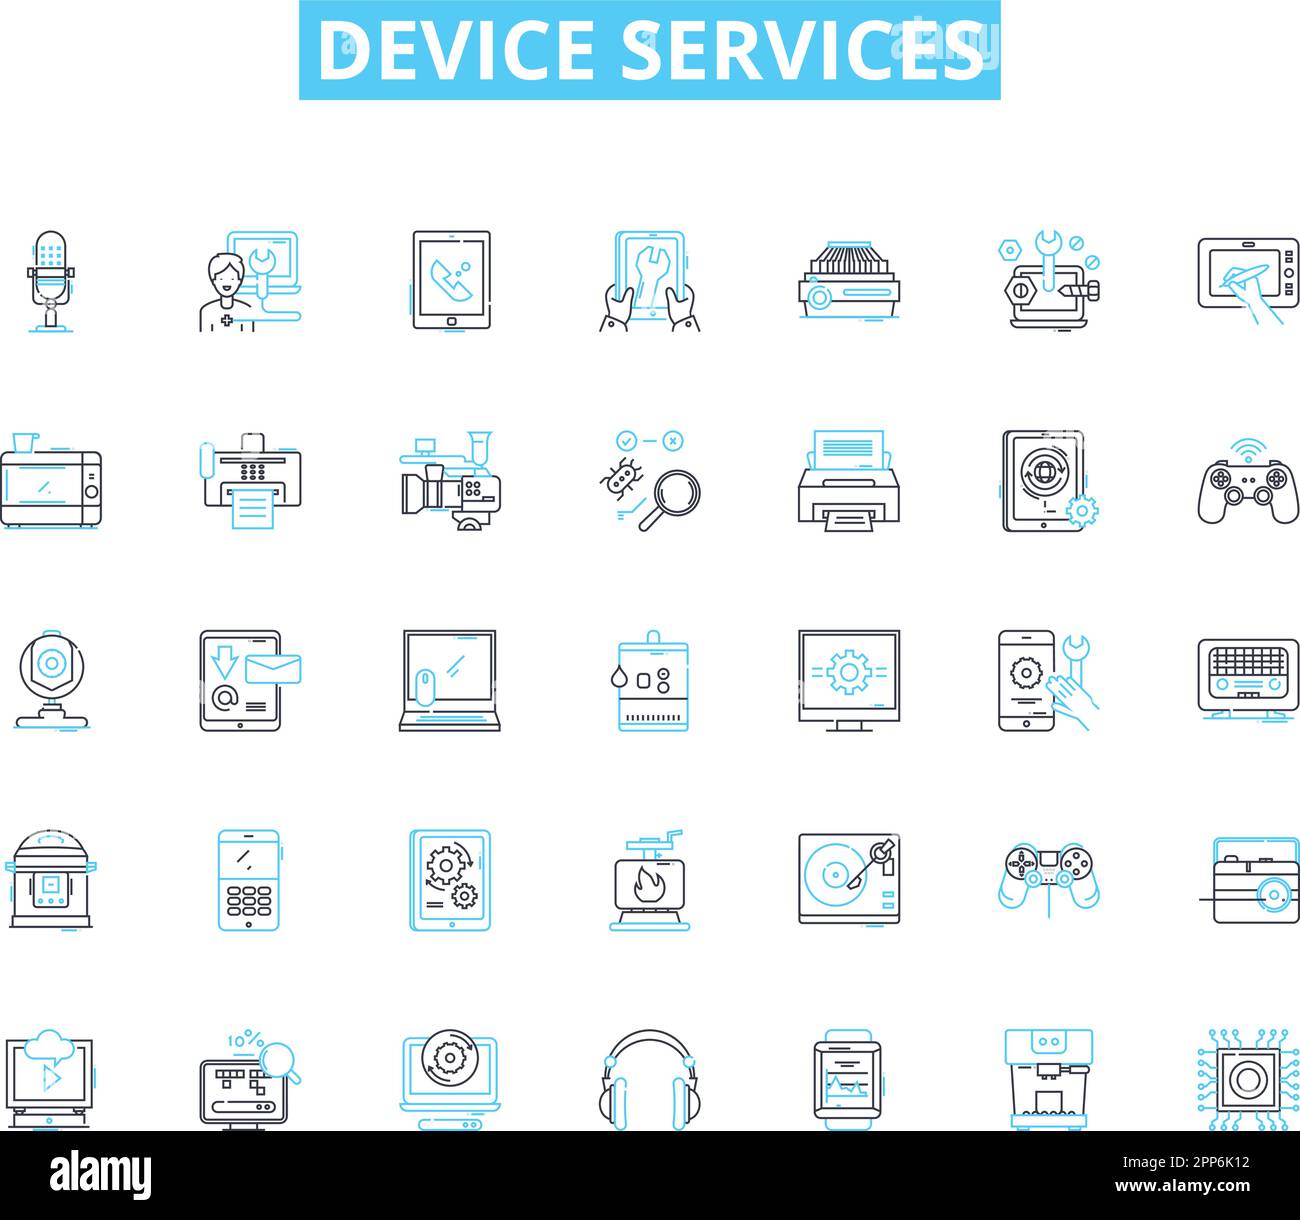 Device services linear icons set. Repairs, Maintenance, Upgrades, Optimization, Diagnostics, Troubleshooting, Configuration line vector and concept Stock Vector